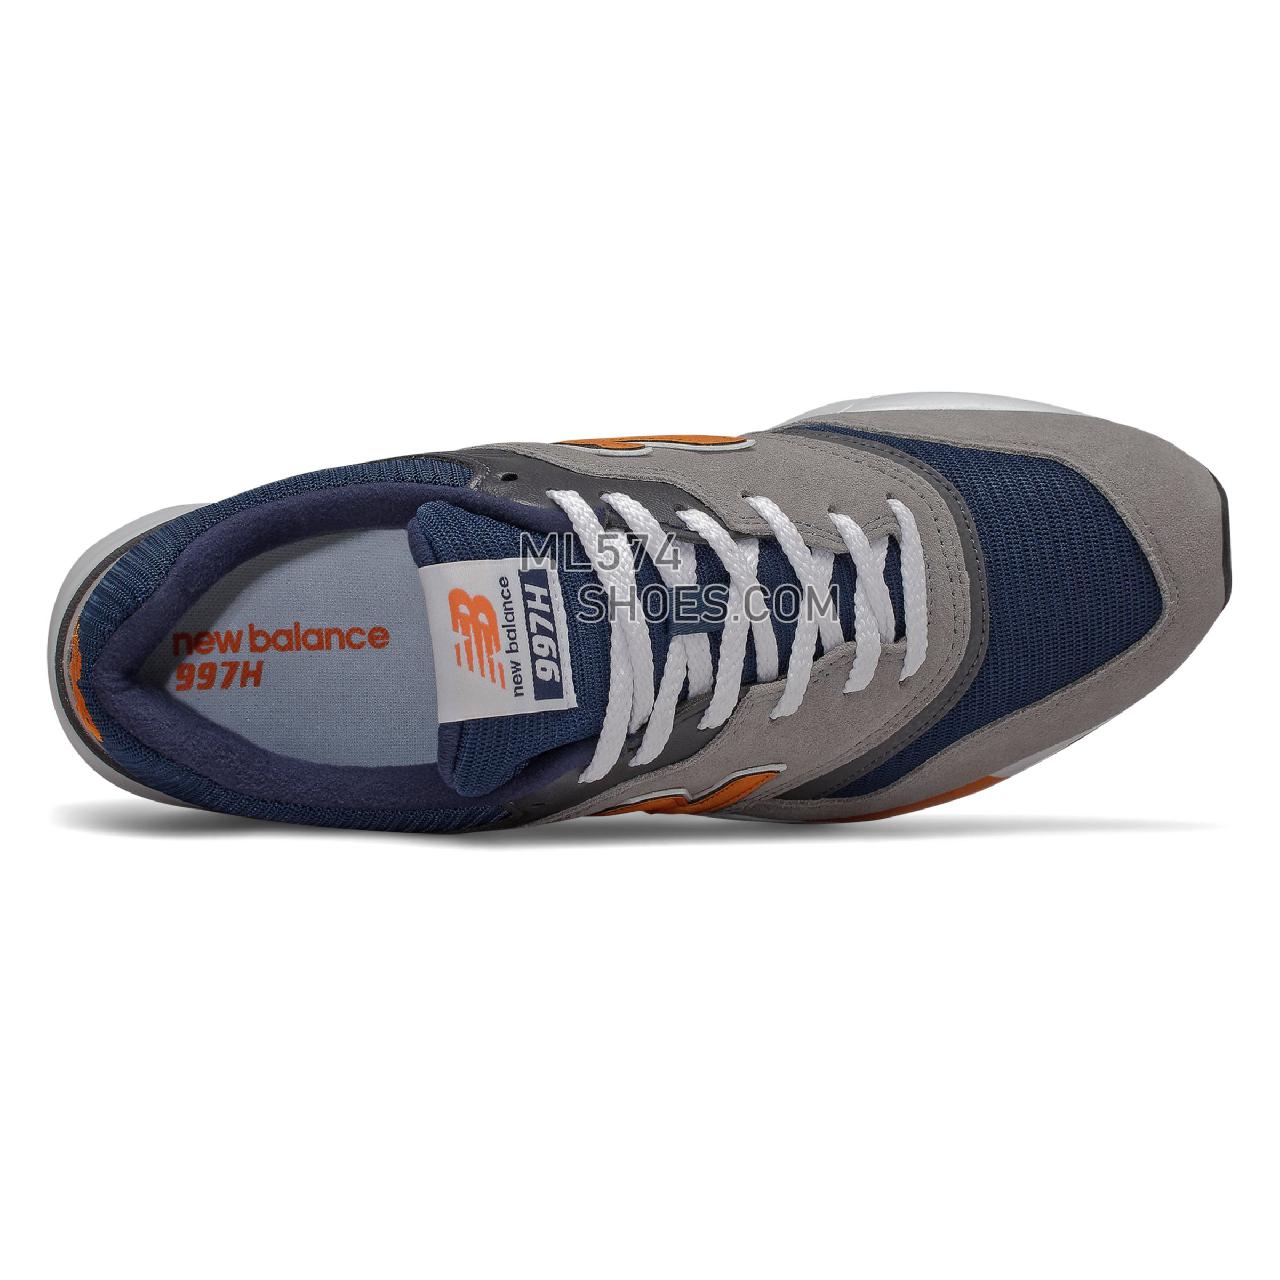 New Balance 997H - Men's 997H Classic - Marblehead with Natural Indigo - CM997HEX